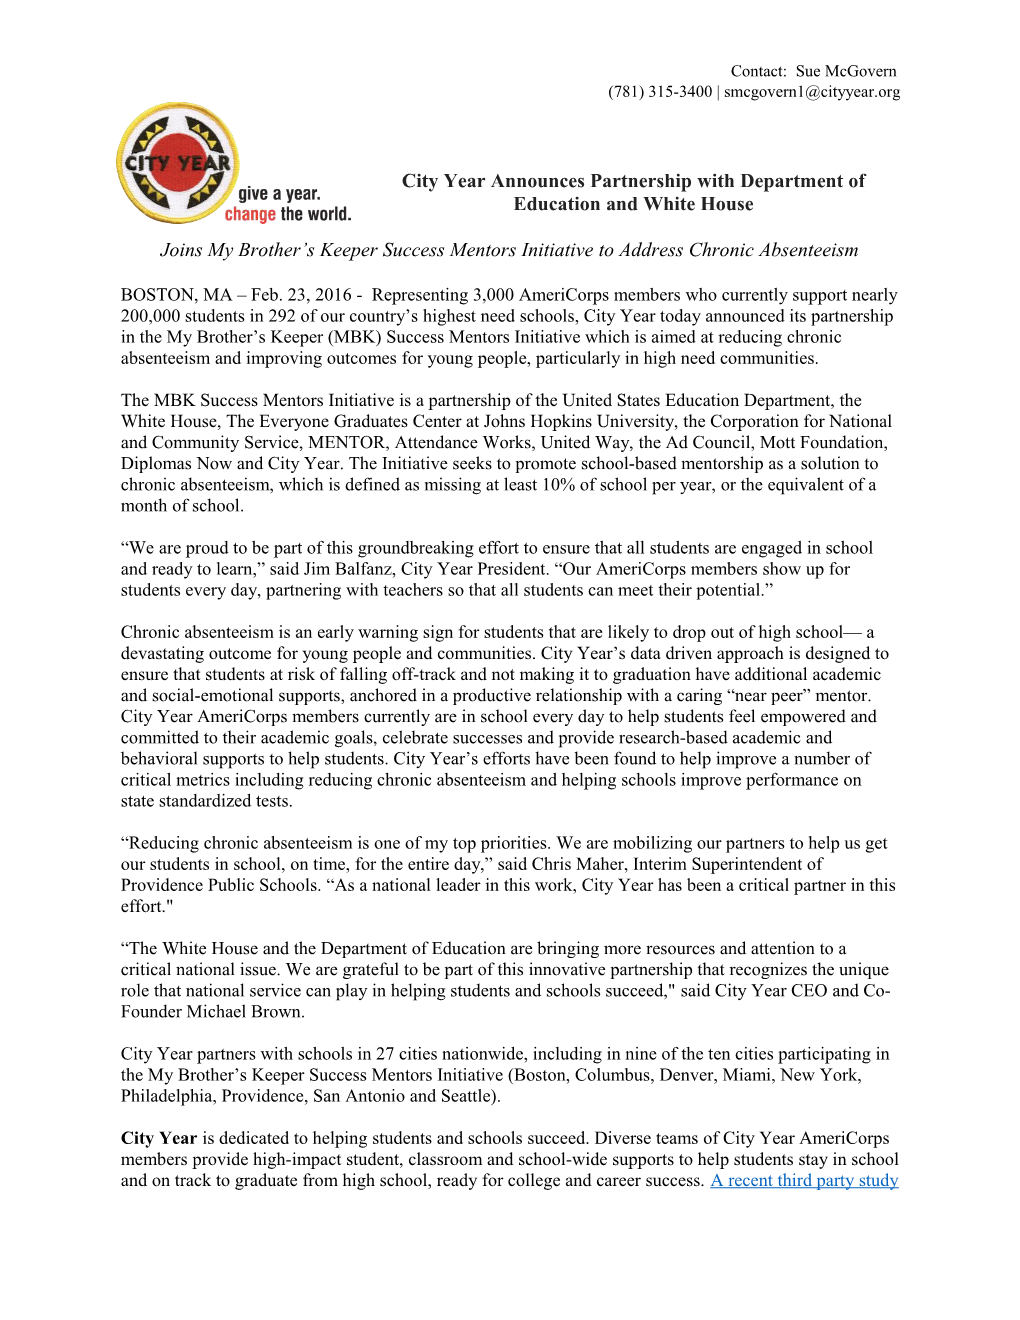 City Year Announces Partnership with Department of Education and White House